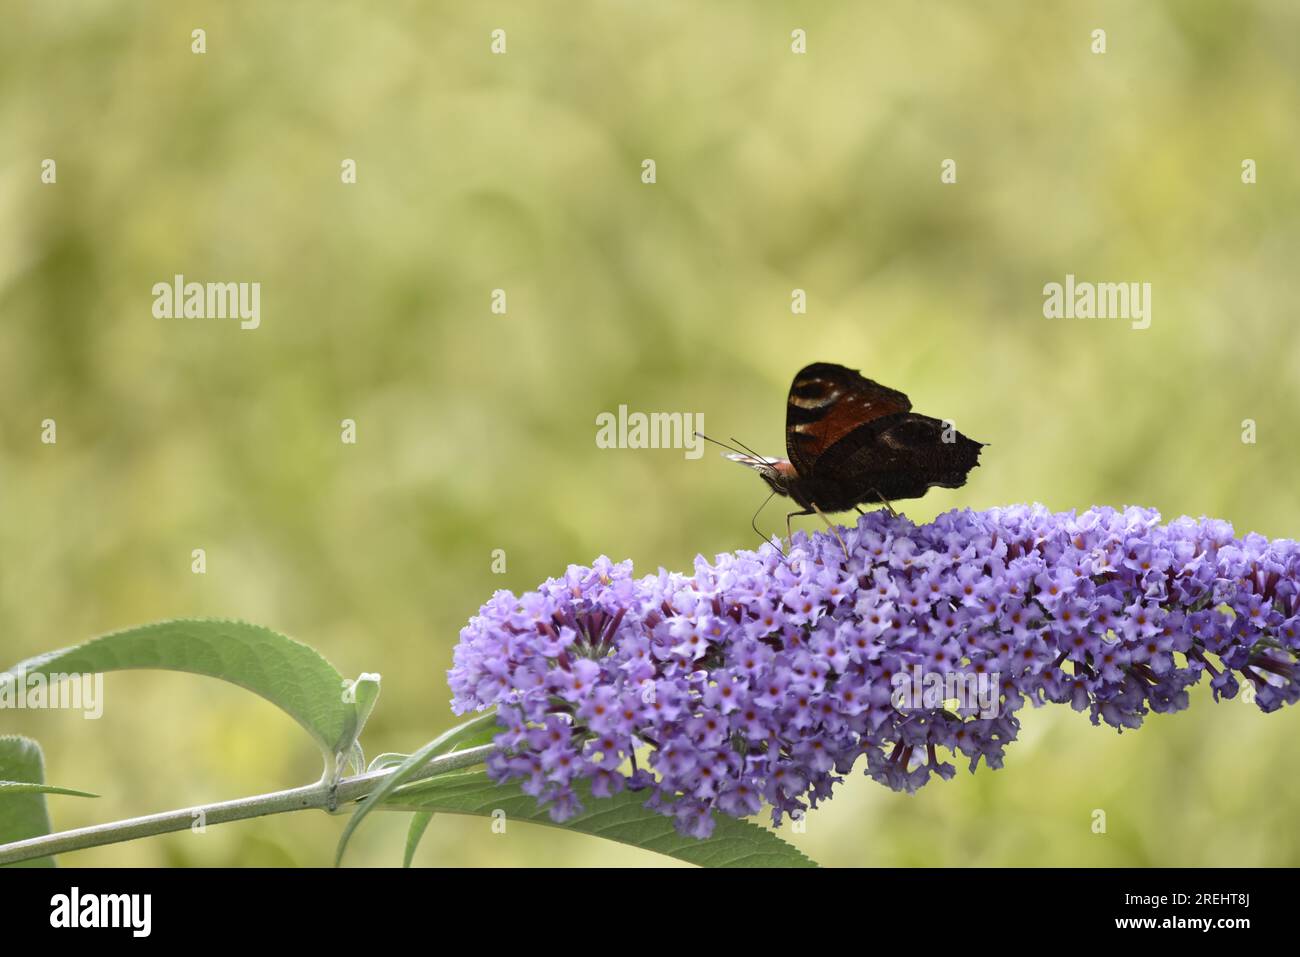 Right Foreground Image of a Peacock Butterfly (Inachis io) Walking Right to Left Along the Top of a Stem of Purple Buddleia Flowers, Bokeh Backdrop Stock Photo